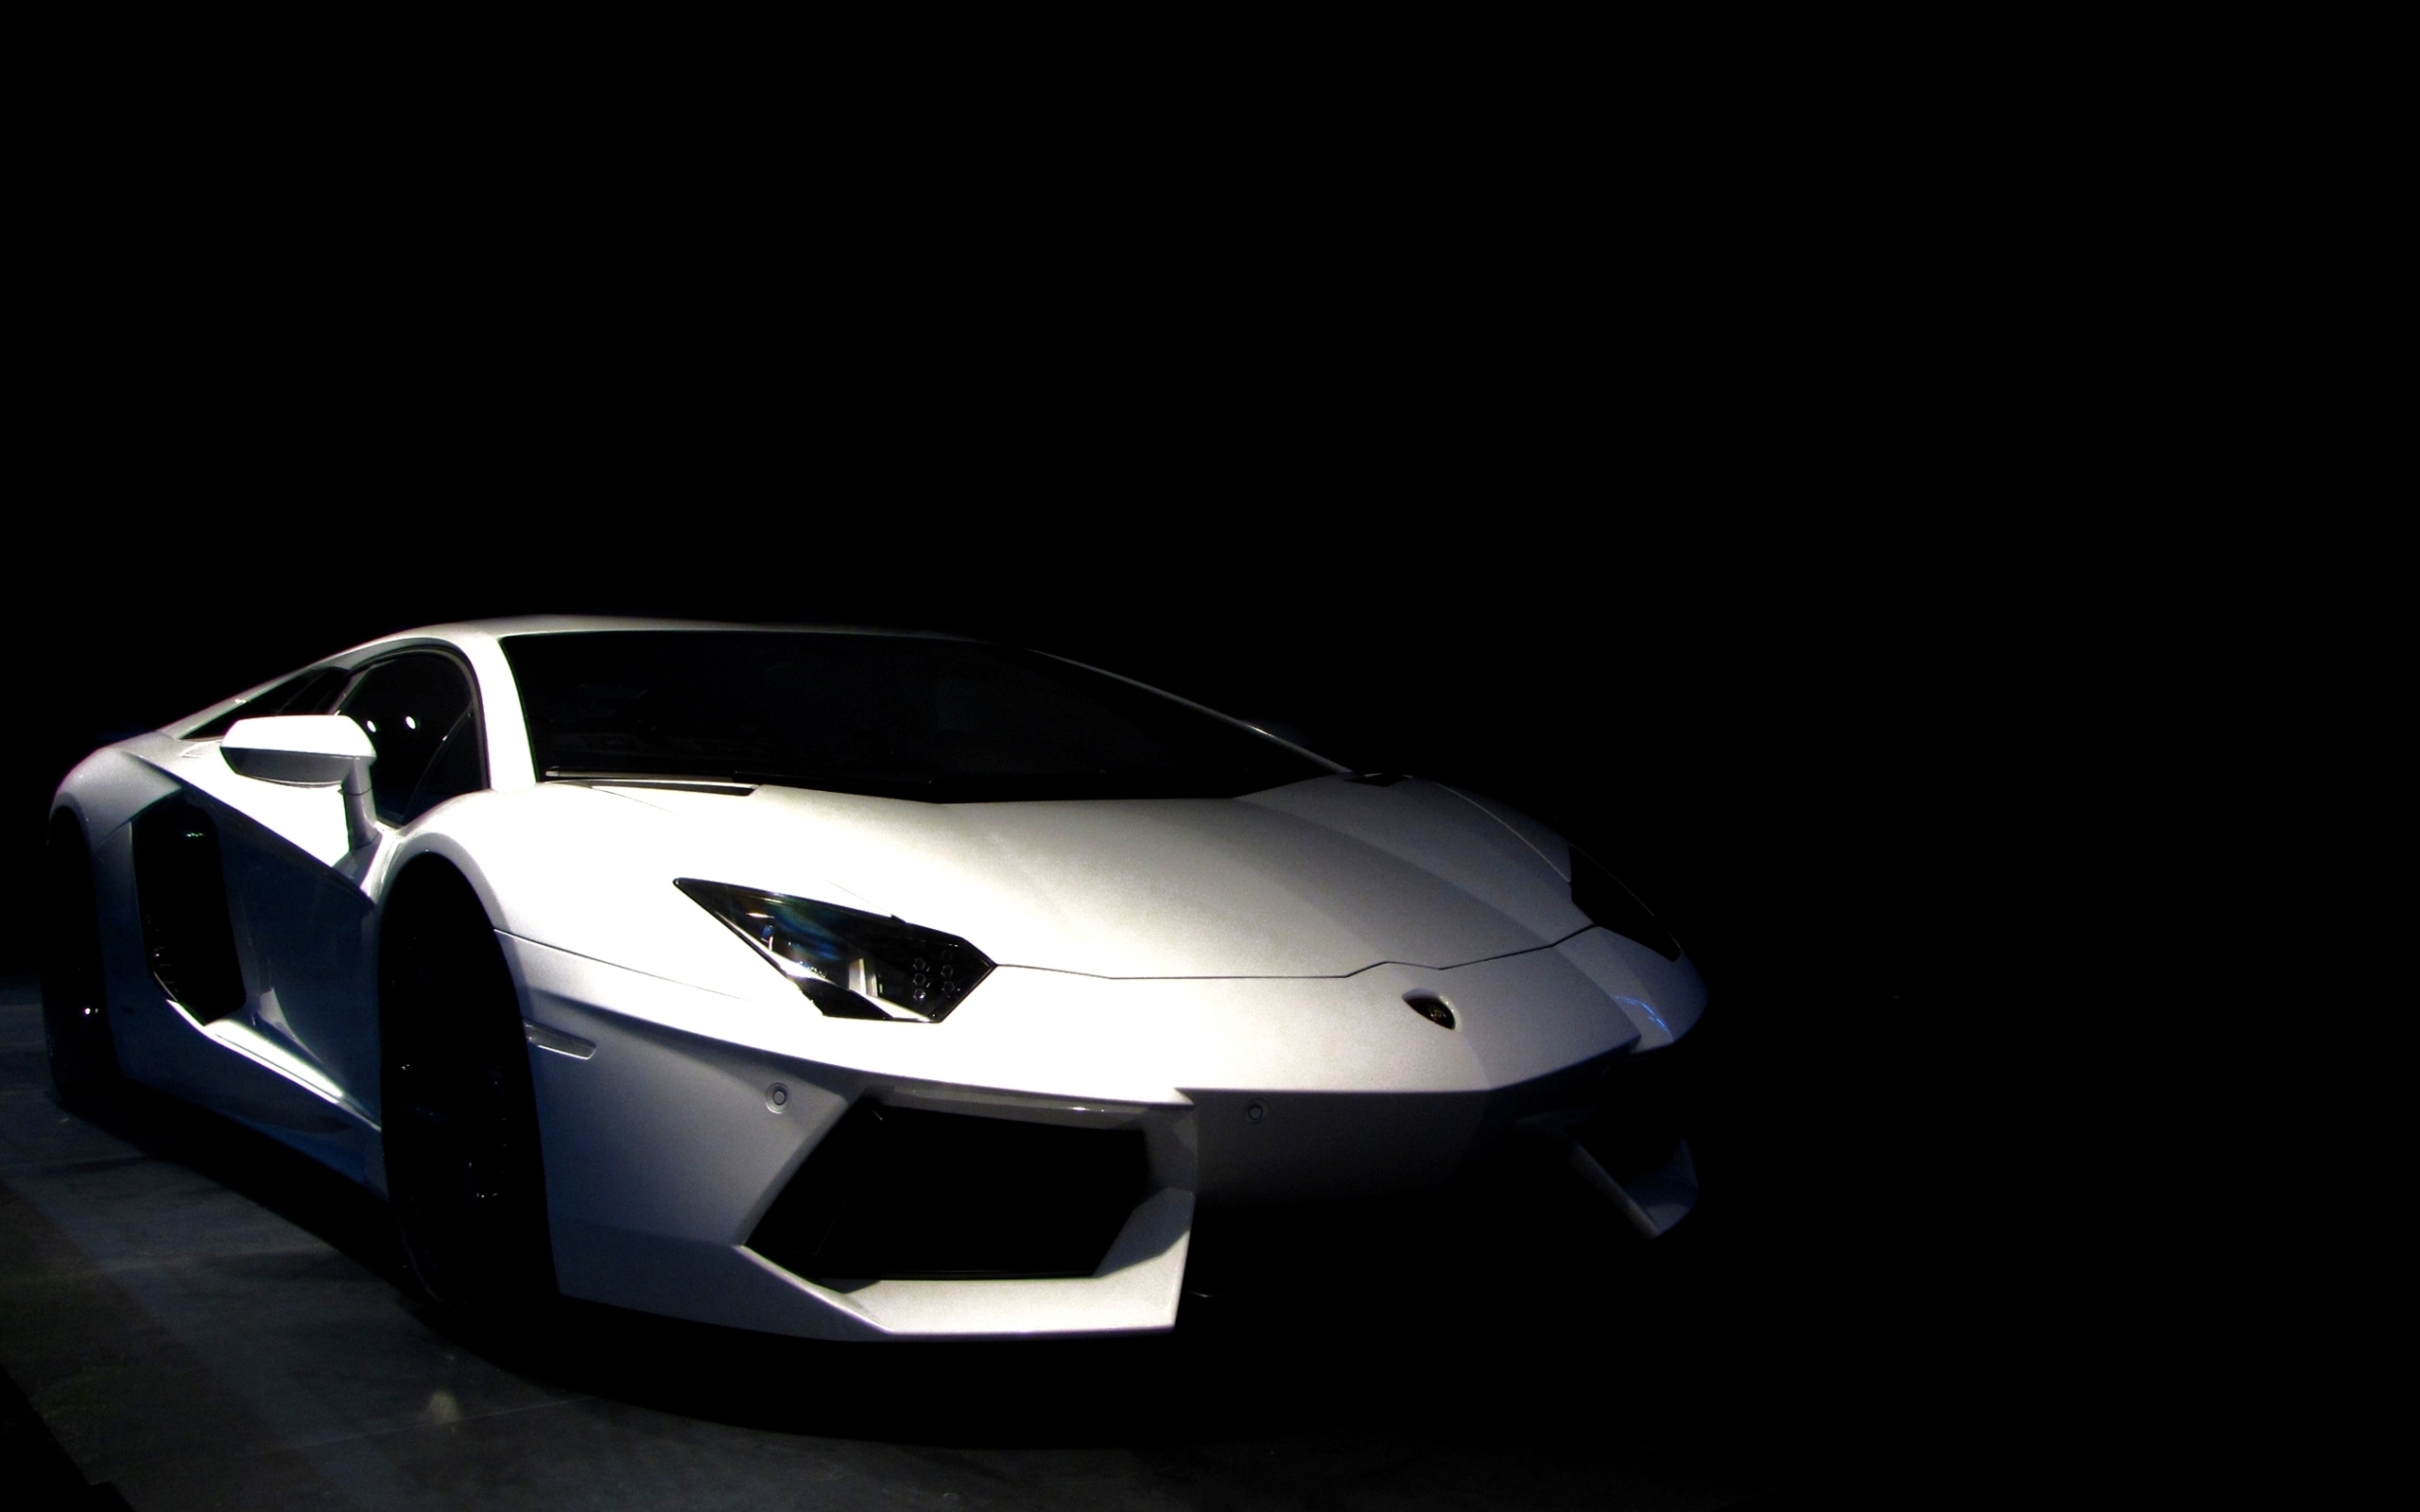 High Quality Lamborghini Aventador Wallpapers | Full HD Pictures